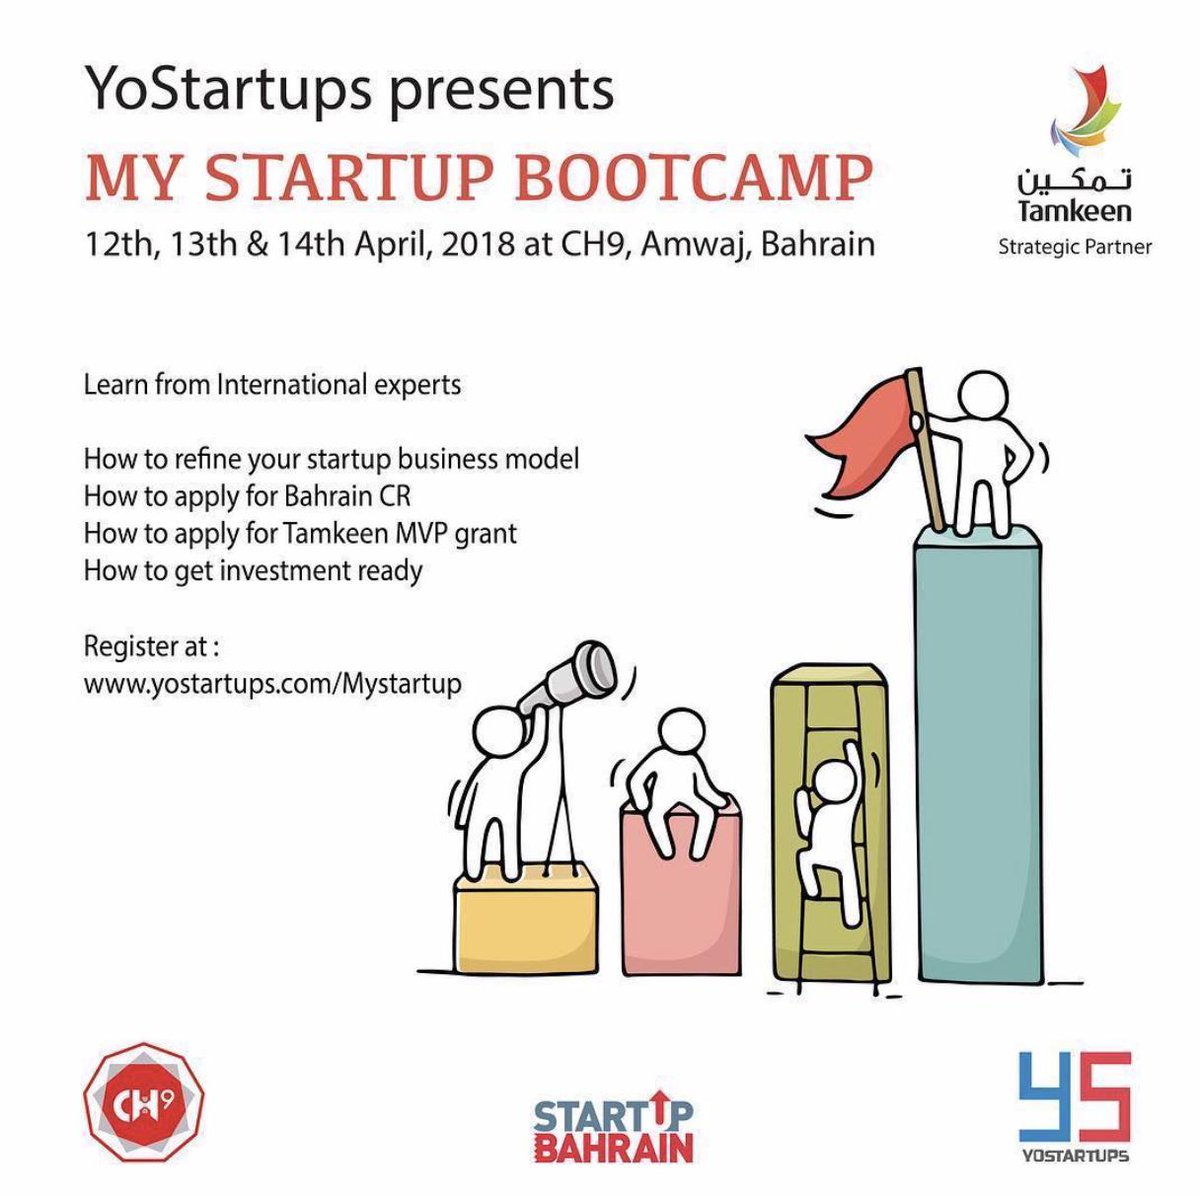 Are you looking to launch your startup or get ready for funding? Join the #Yostartups #MyStartupBootcamp in Bahrain to fast track your #startup venture.